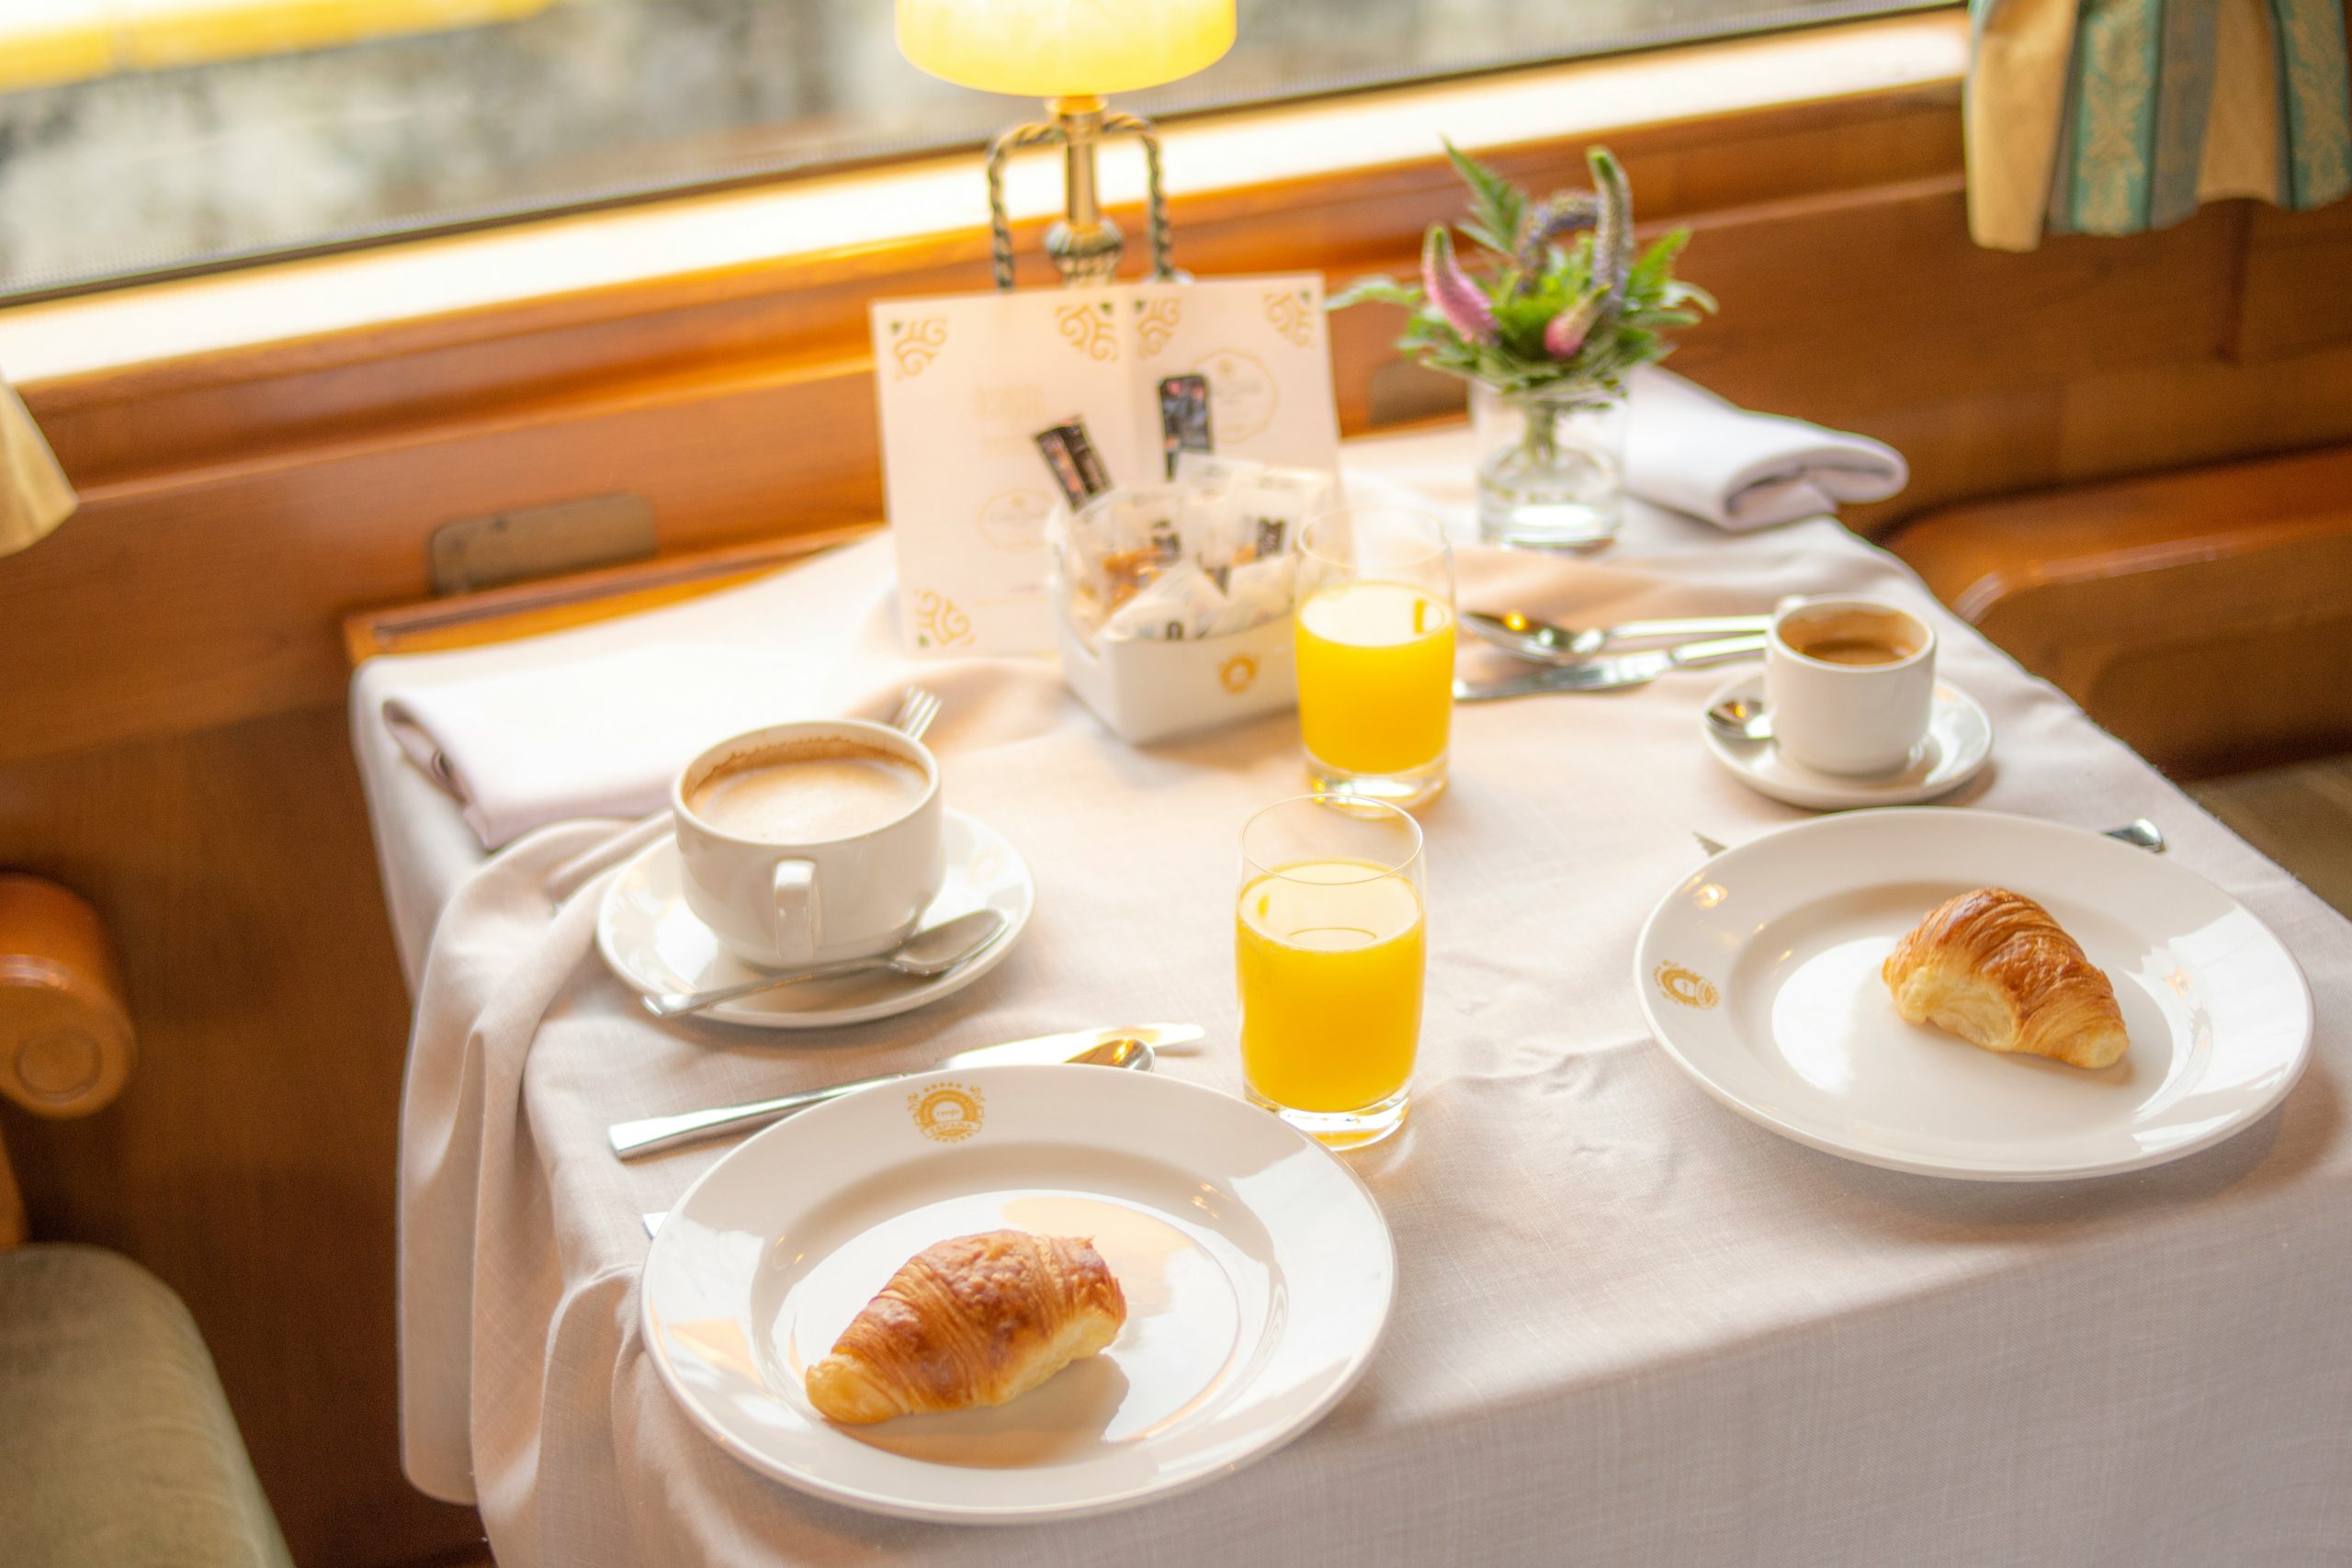 experience the epitome of luxury travel aboard our exquisite luxury trains. indulge in opulence, splendid views, and exceptional service as you journey in unparalleled style.